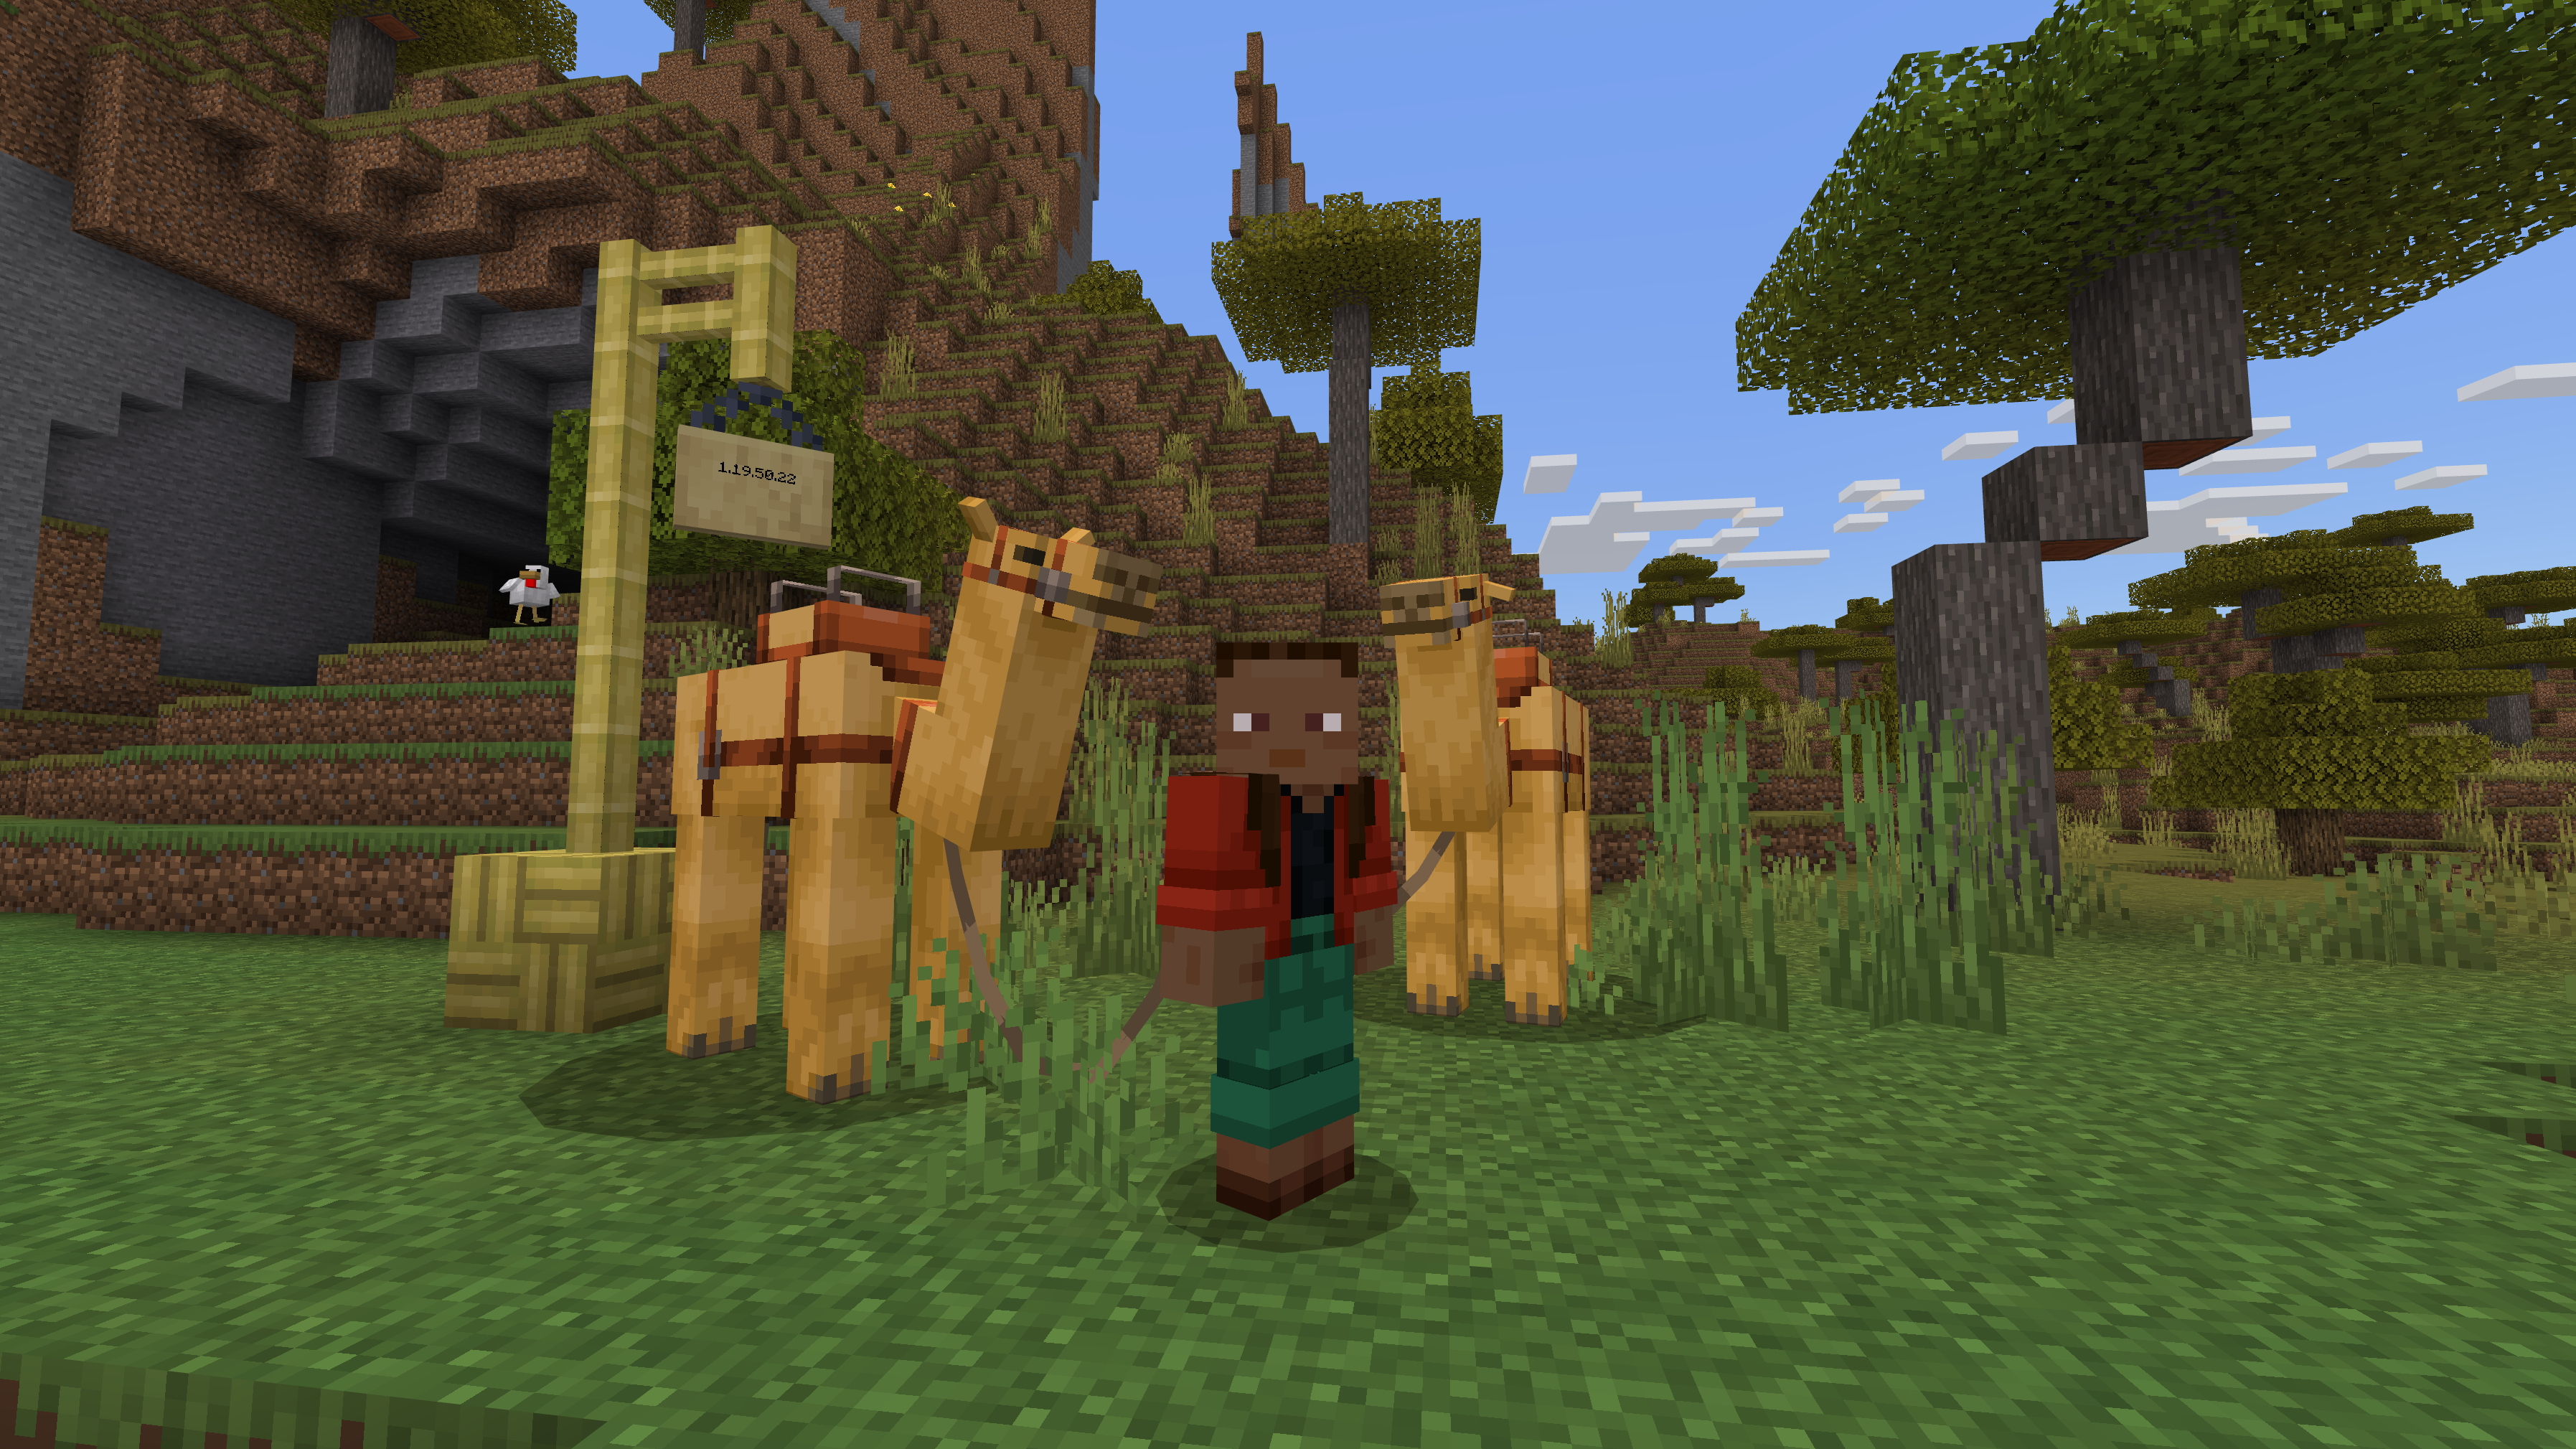 A Minecraft screenshot showing a character and two camels on leads, standing near a bamboo fence and hanging sign